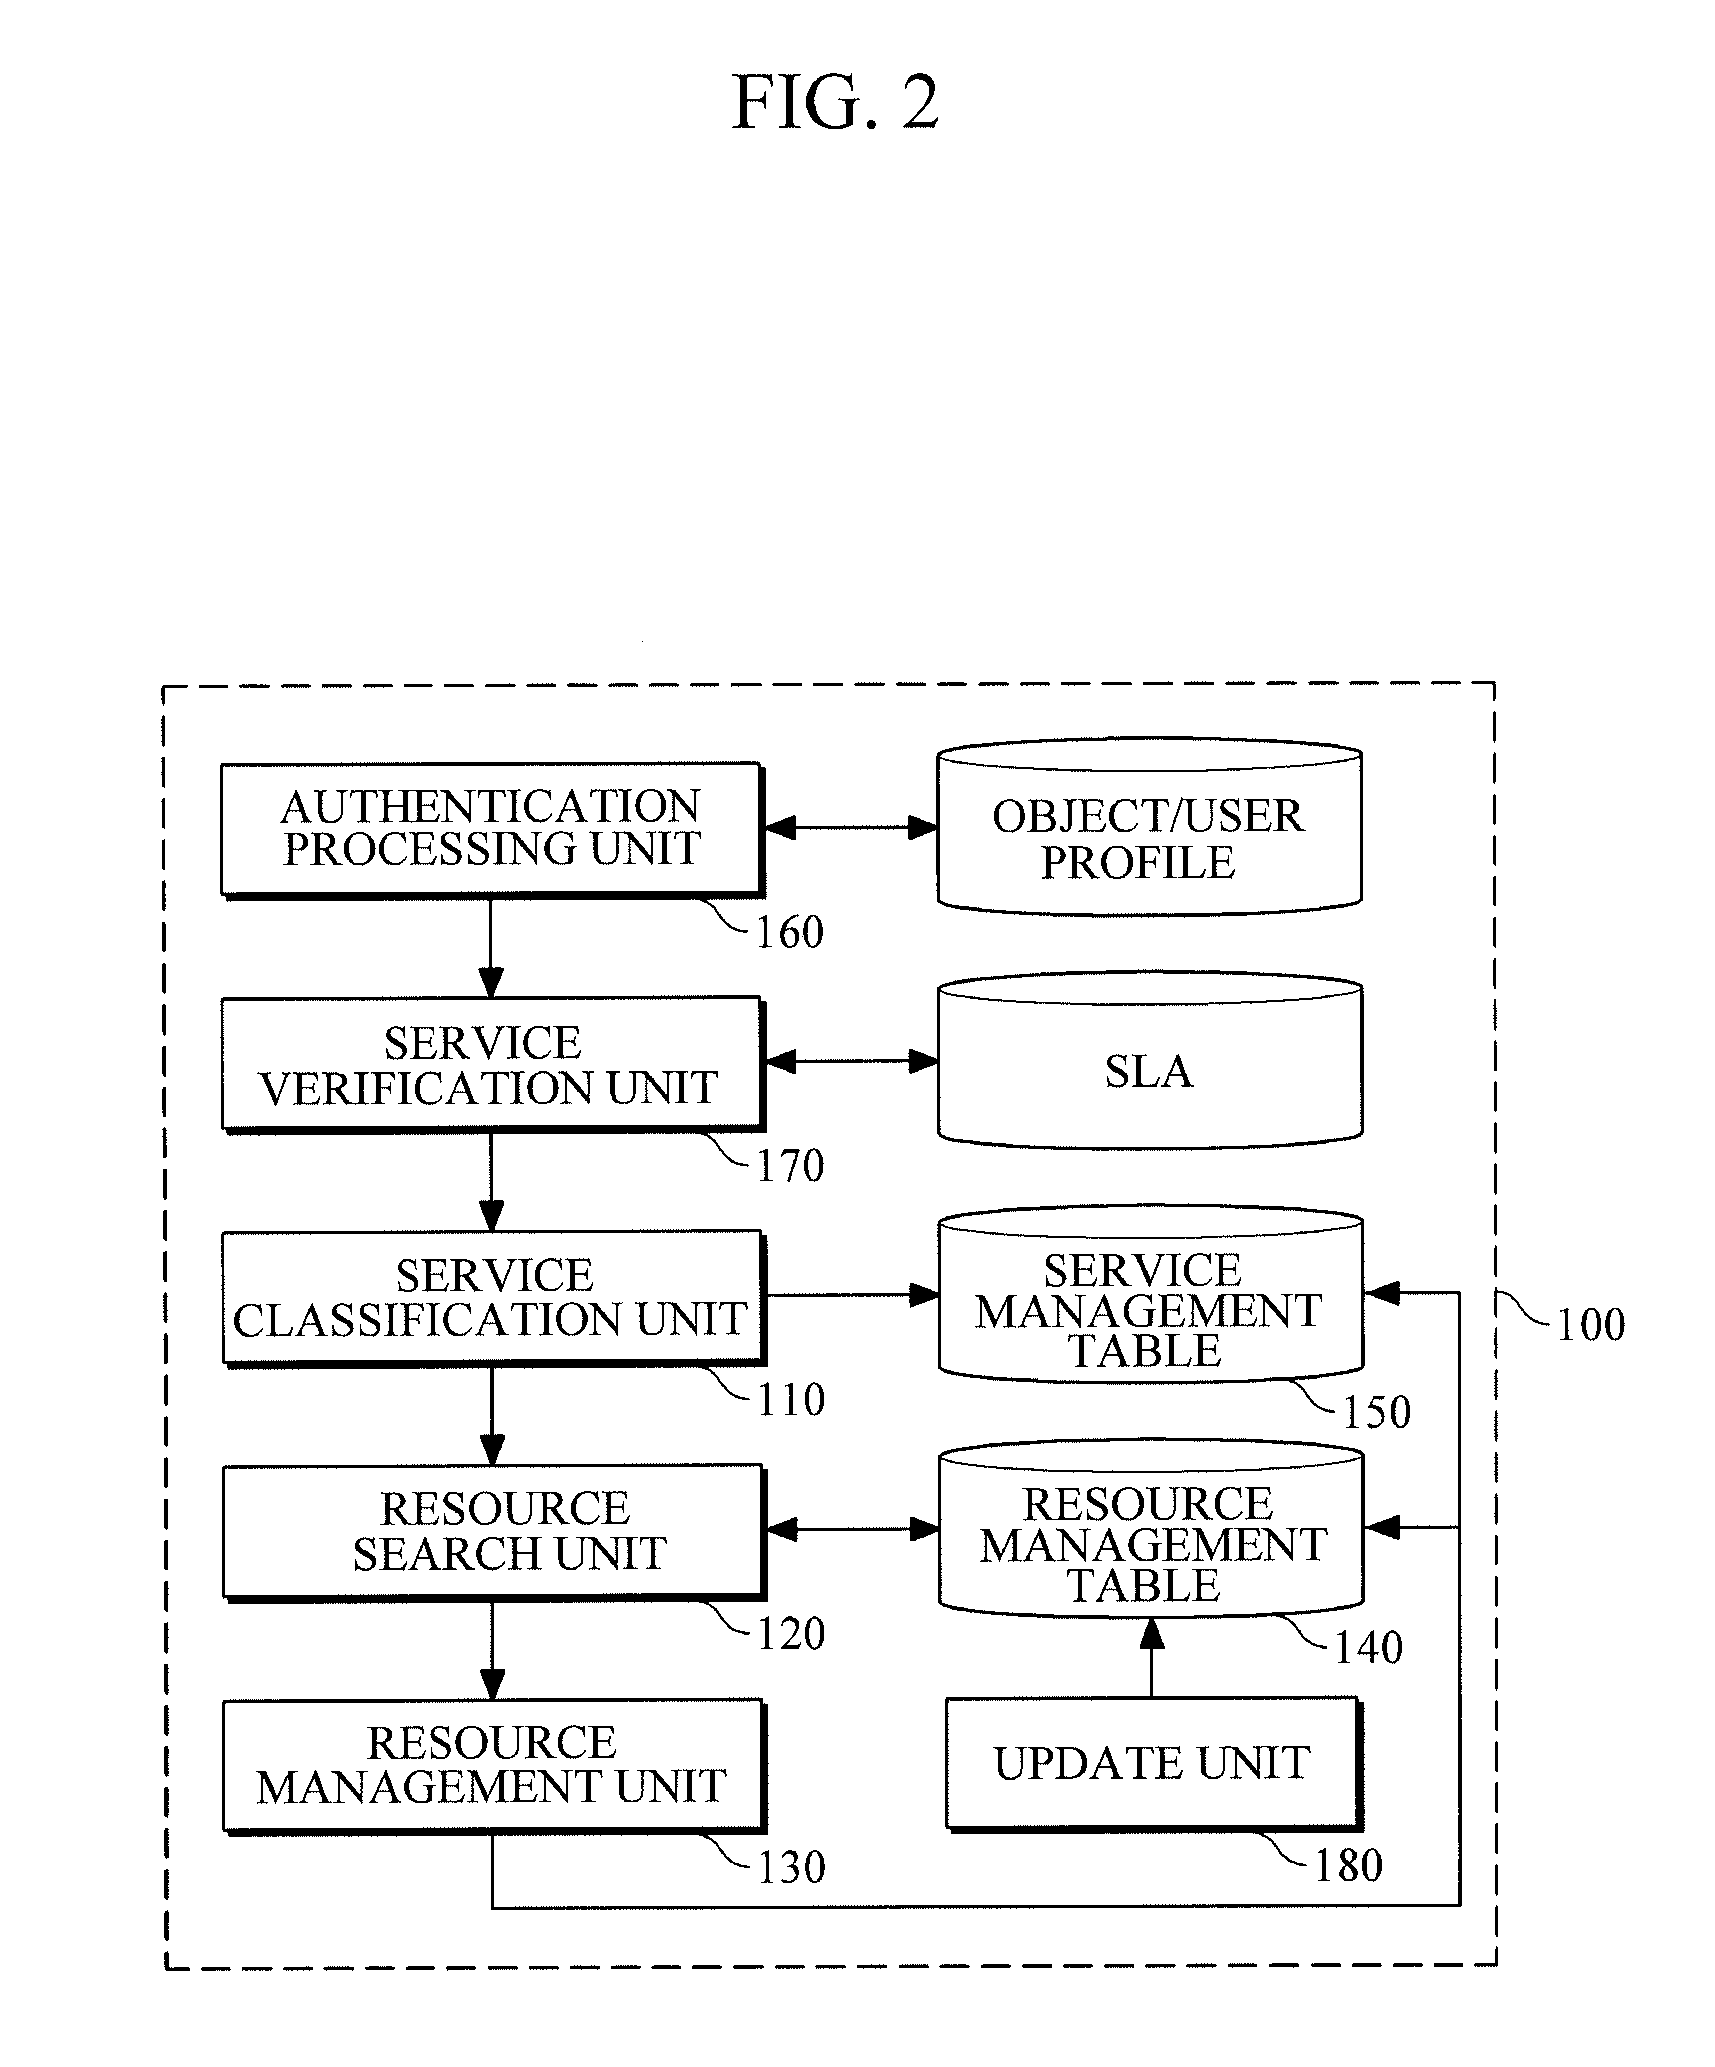 Resource management apparatus and method for supporting cloud-based communication between ubiquitous objects